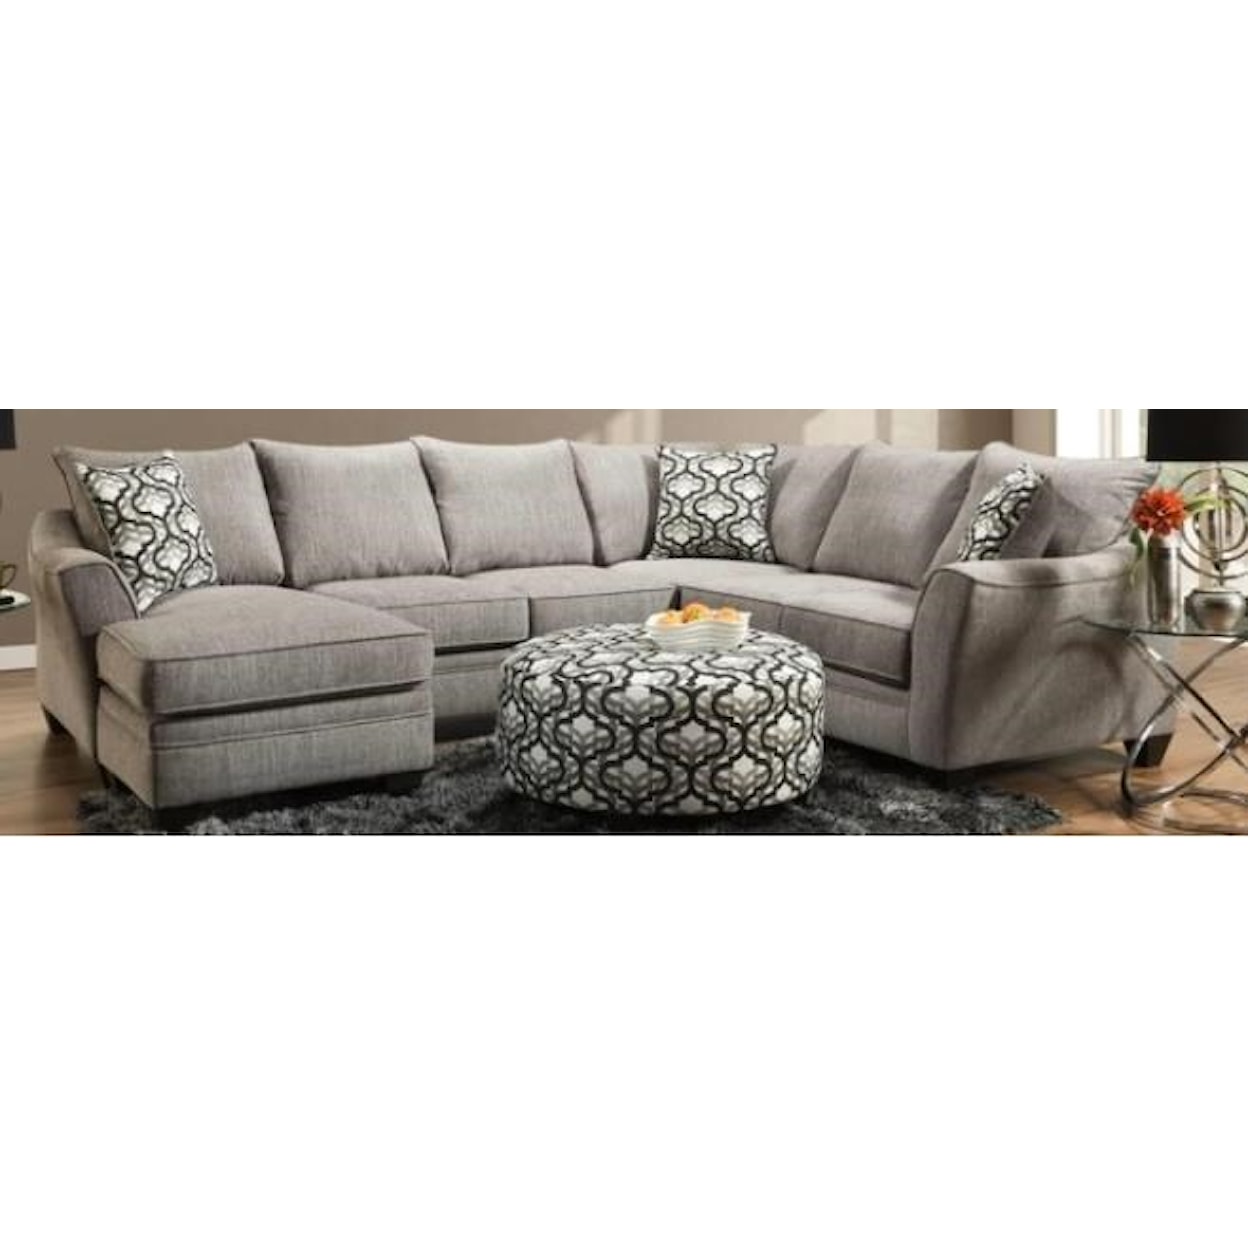 Peak Living Belford Belford Sectional Sofa with Chaise